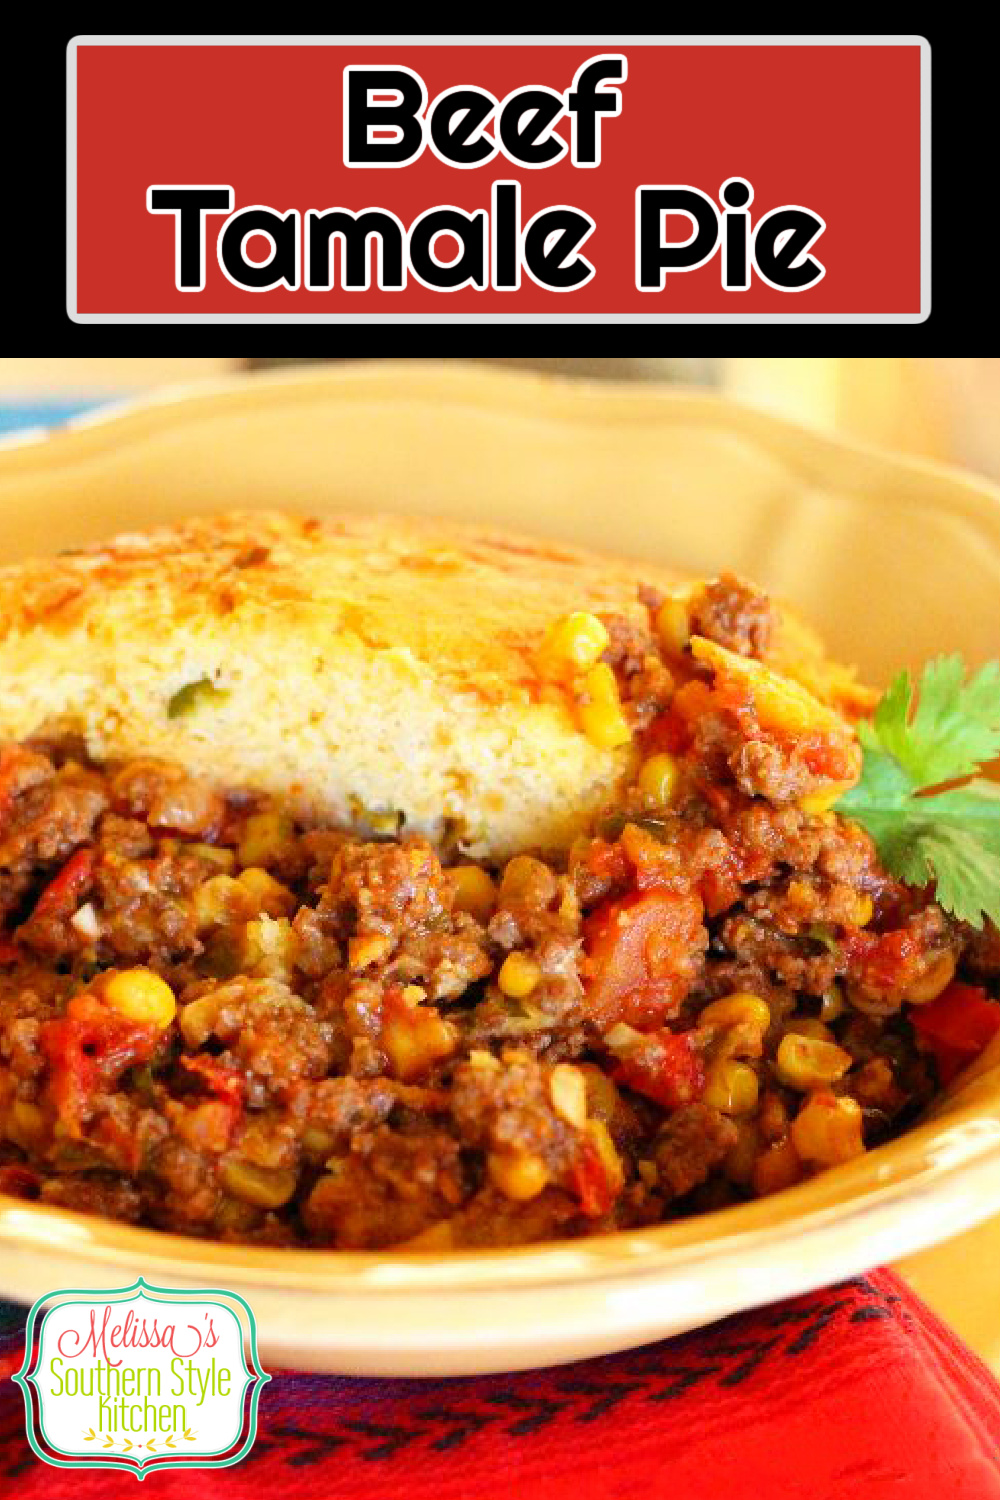 Top this green chile cornbread crusted Beef Tamale Pie with your favorite fixings and transform any meal into a homemade fiesta #beefrecipes #tamalepie #beeytamalepie #easygroundbeefrecipes #groundbeefrecipes #tamales #greenchilecornbread #cornbread